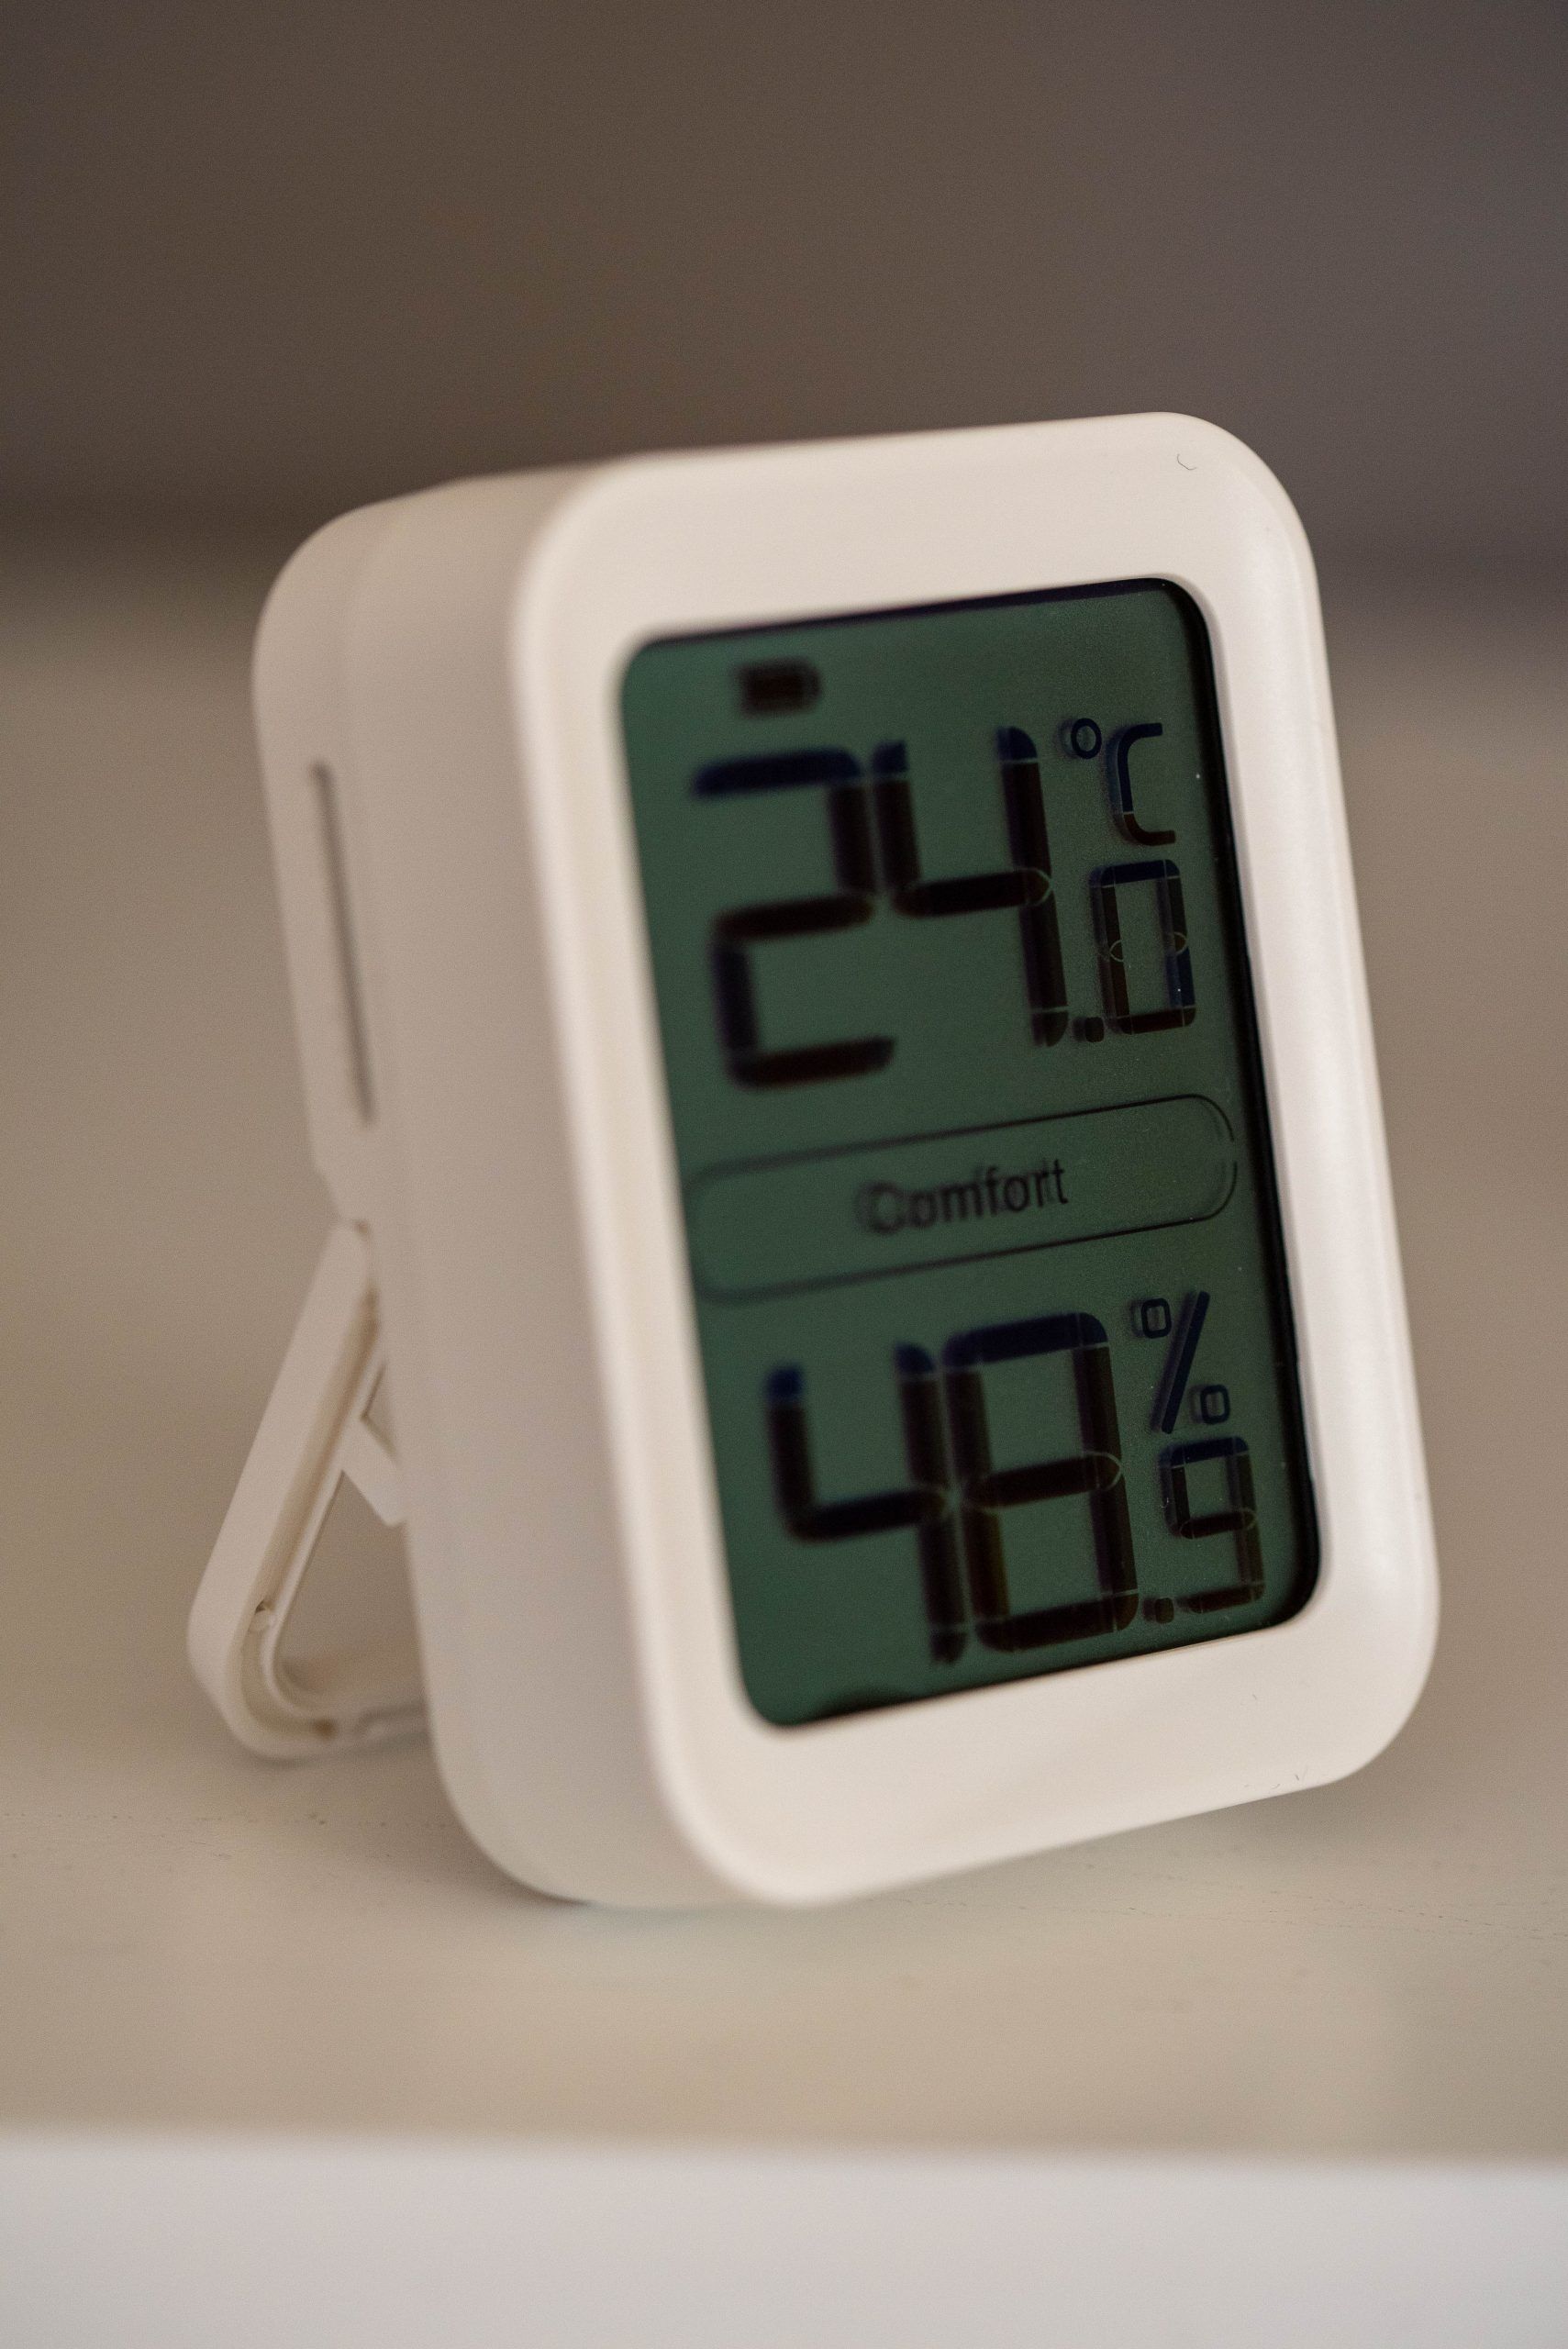 IKONN TI-1 thermometer stands on a shelf using the extendable booth